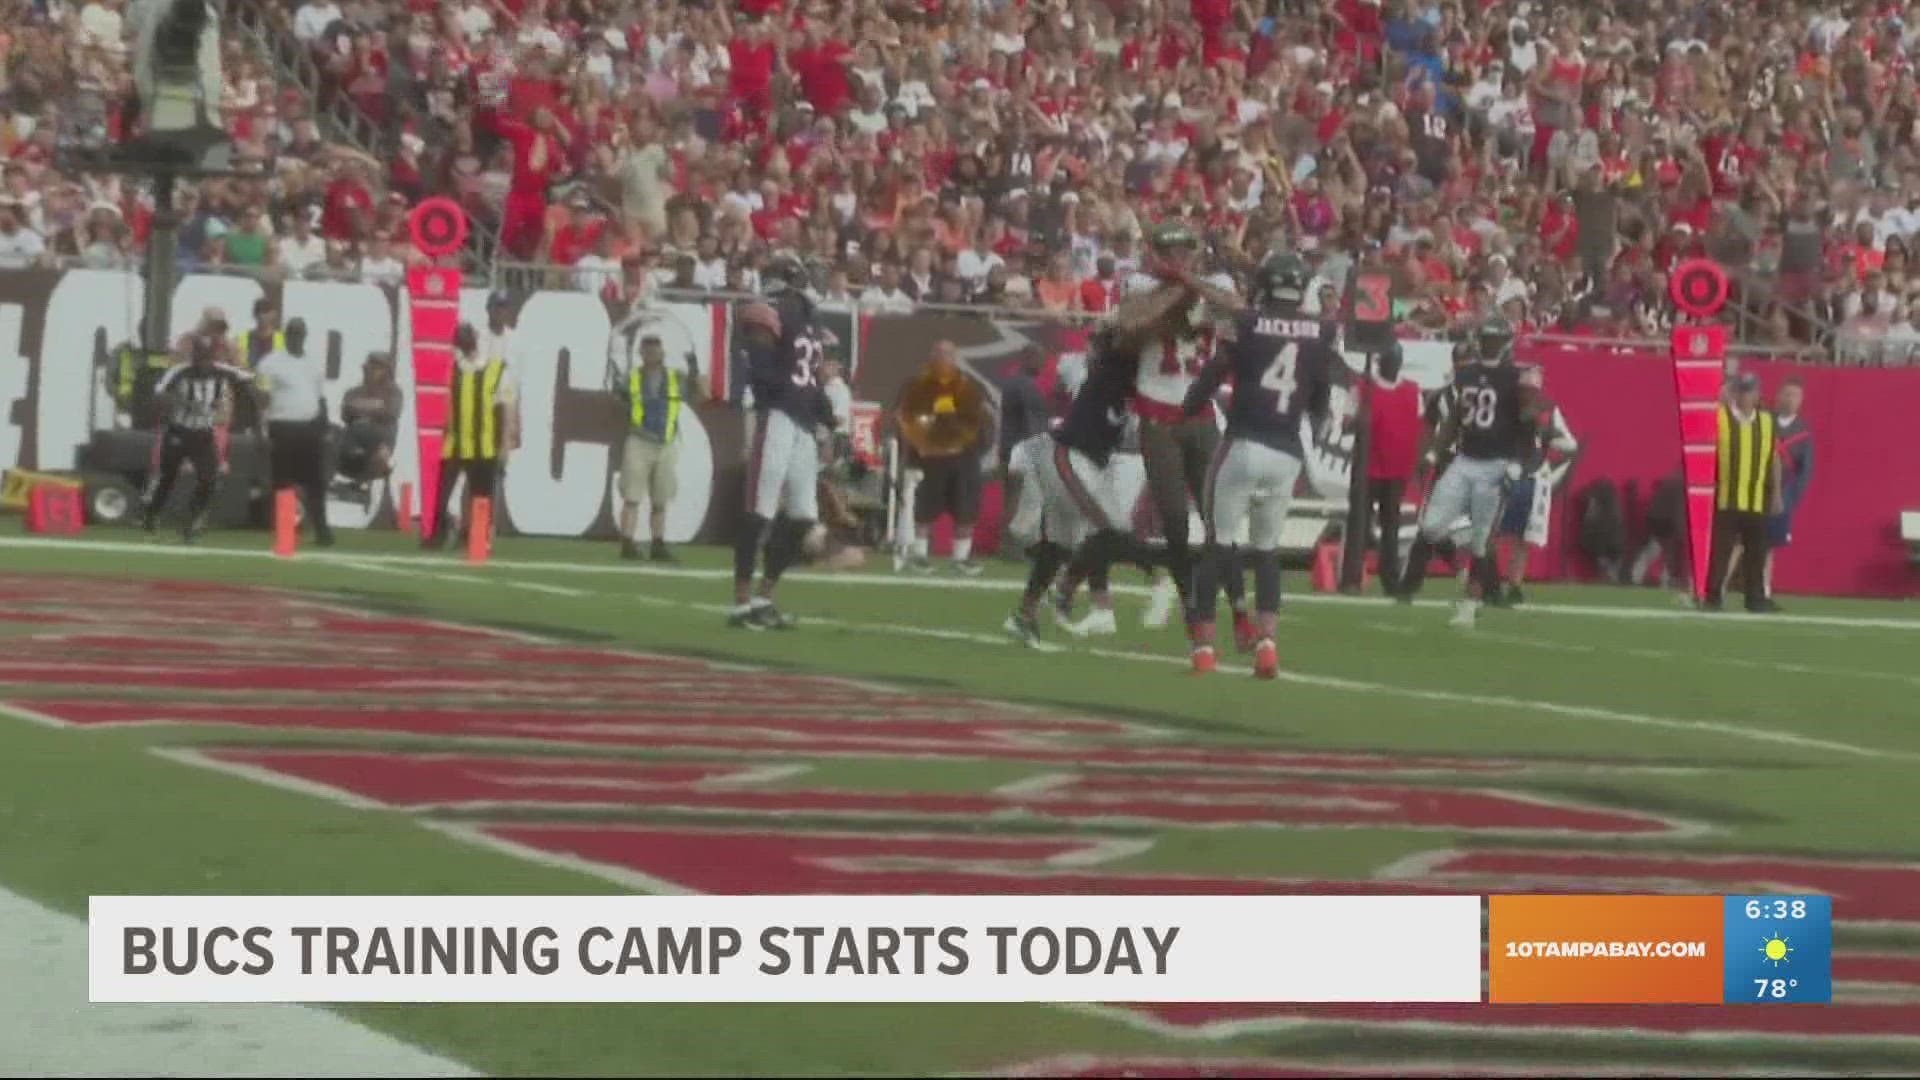 Bucs training camp Here's what you need to know